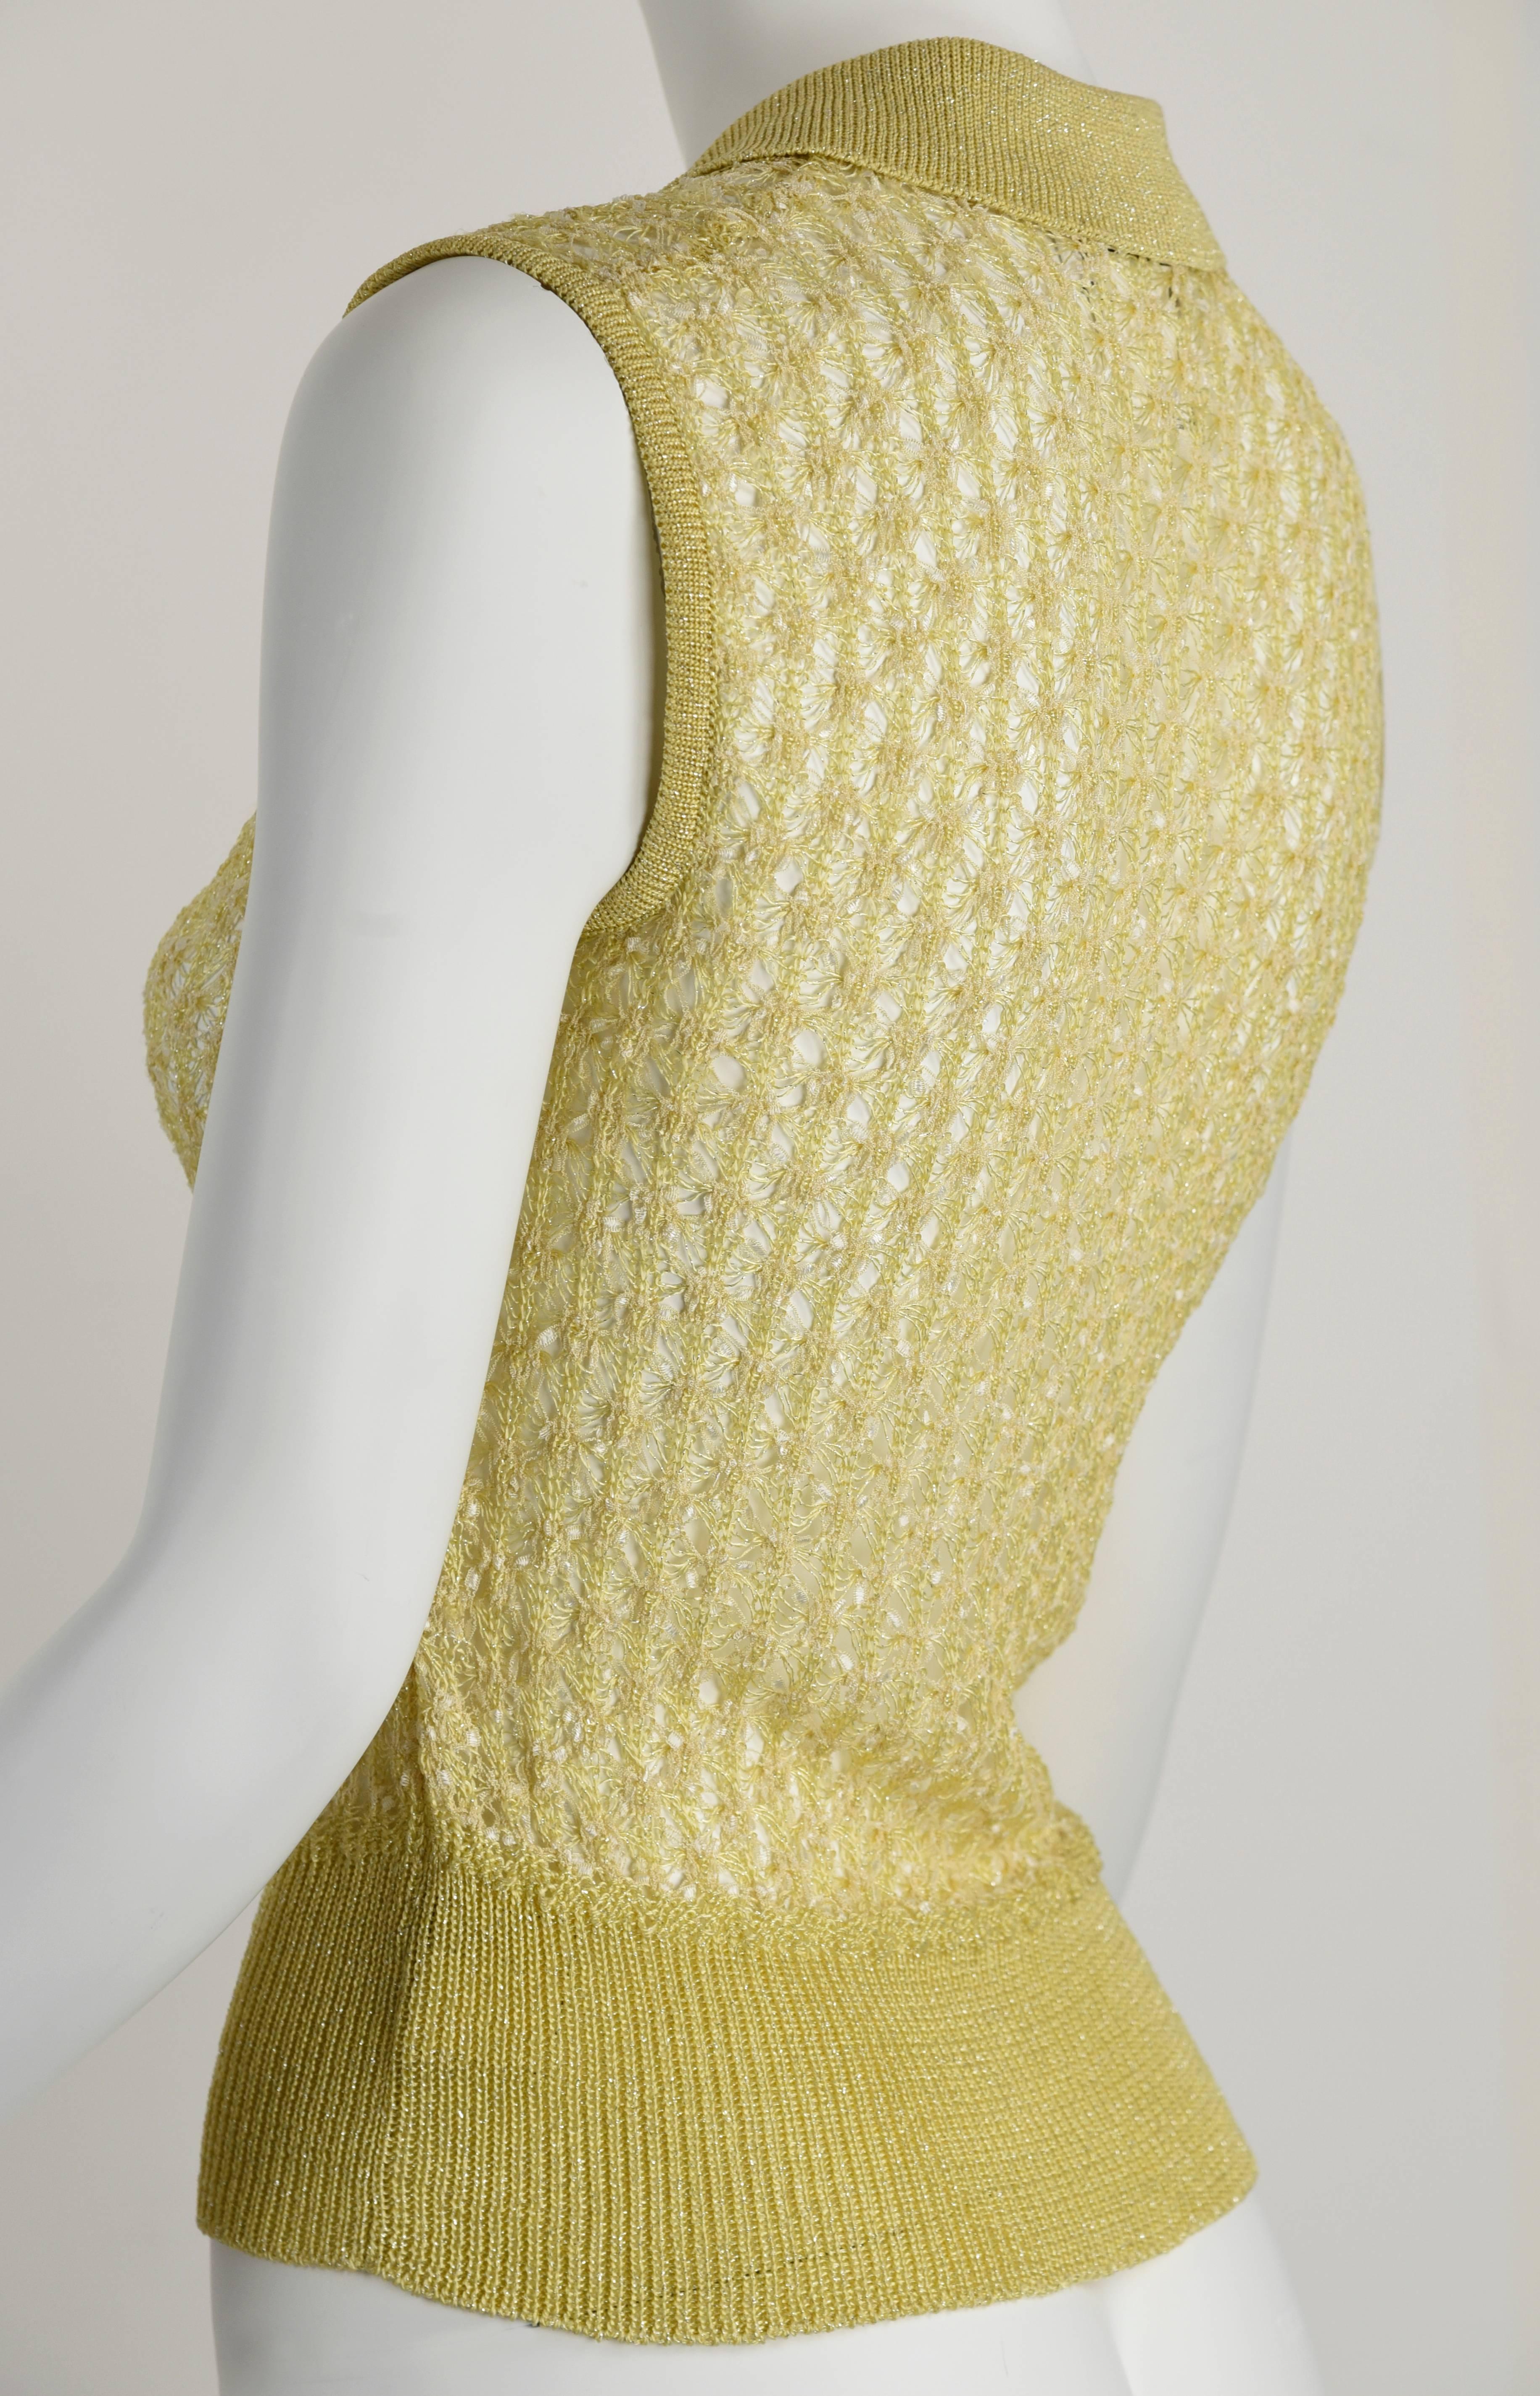 Chanel Boutique 1997P Gold/Metallic Crochet Sleeveless Top with Clear Buttons 42 In New Condition For Sale In Portland, OR